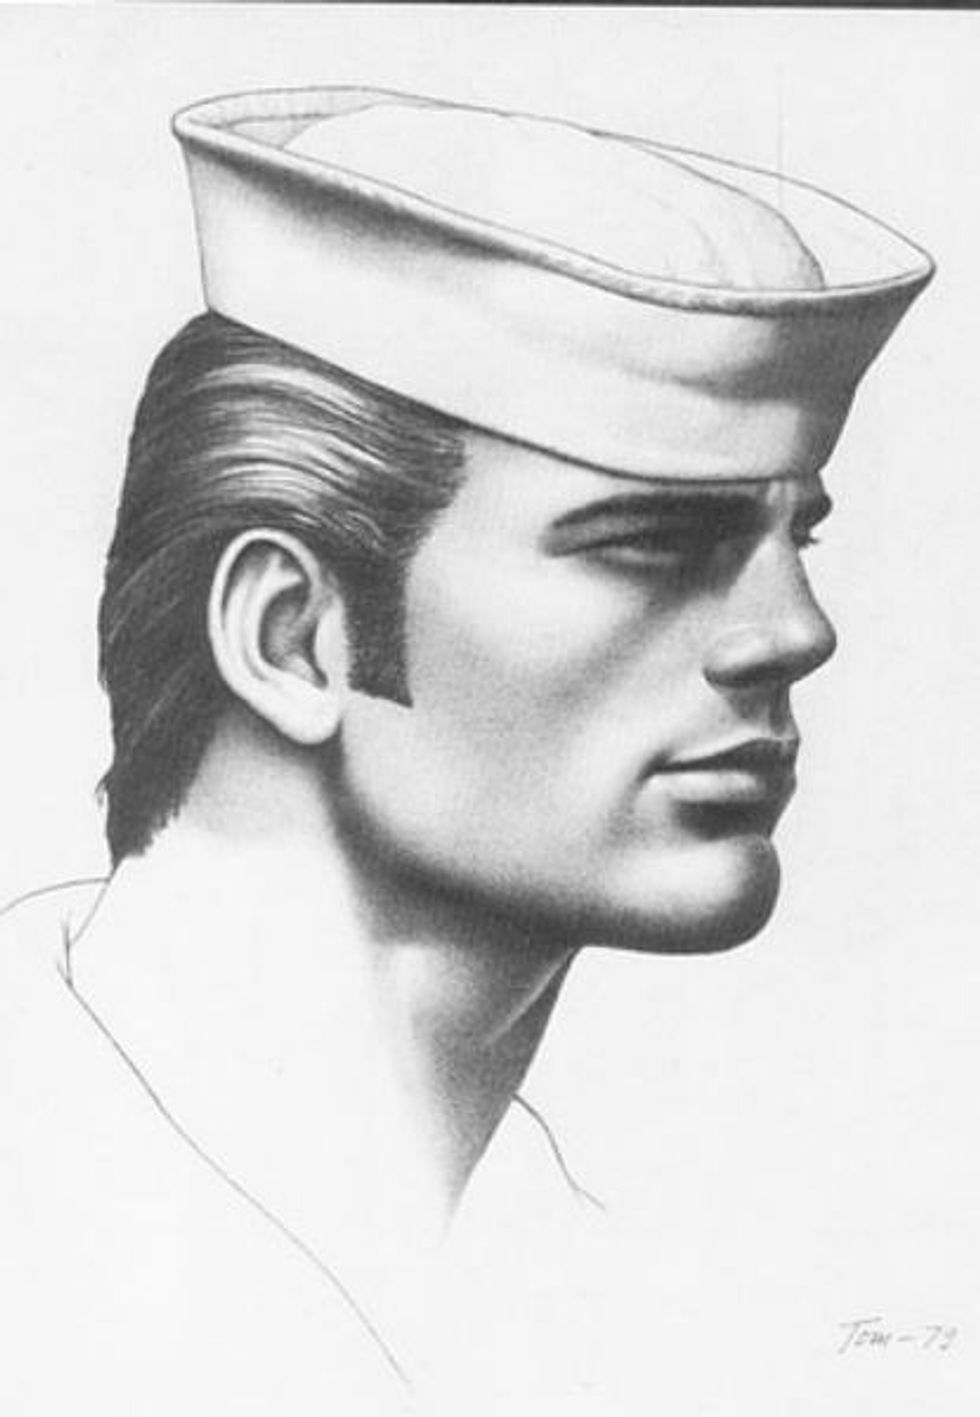 Tom of Finland (Mid 1940s)